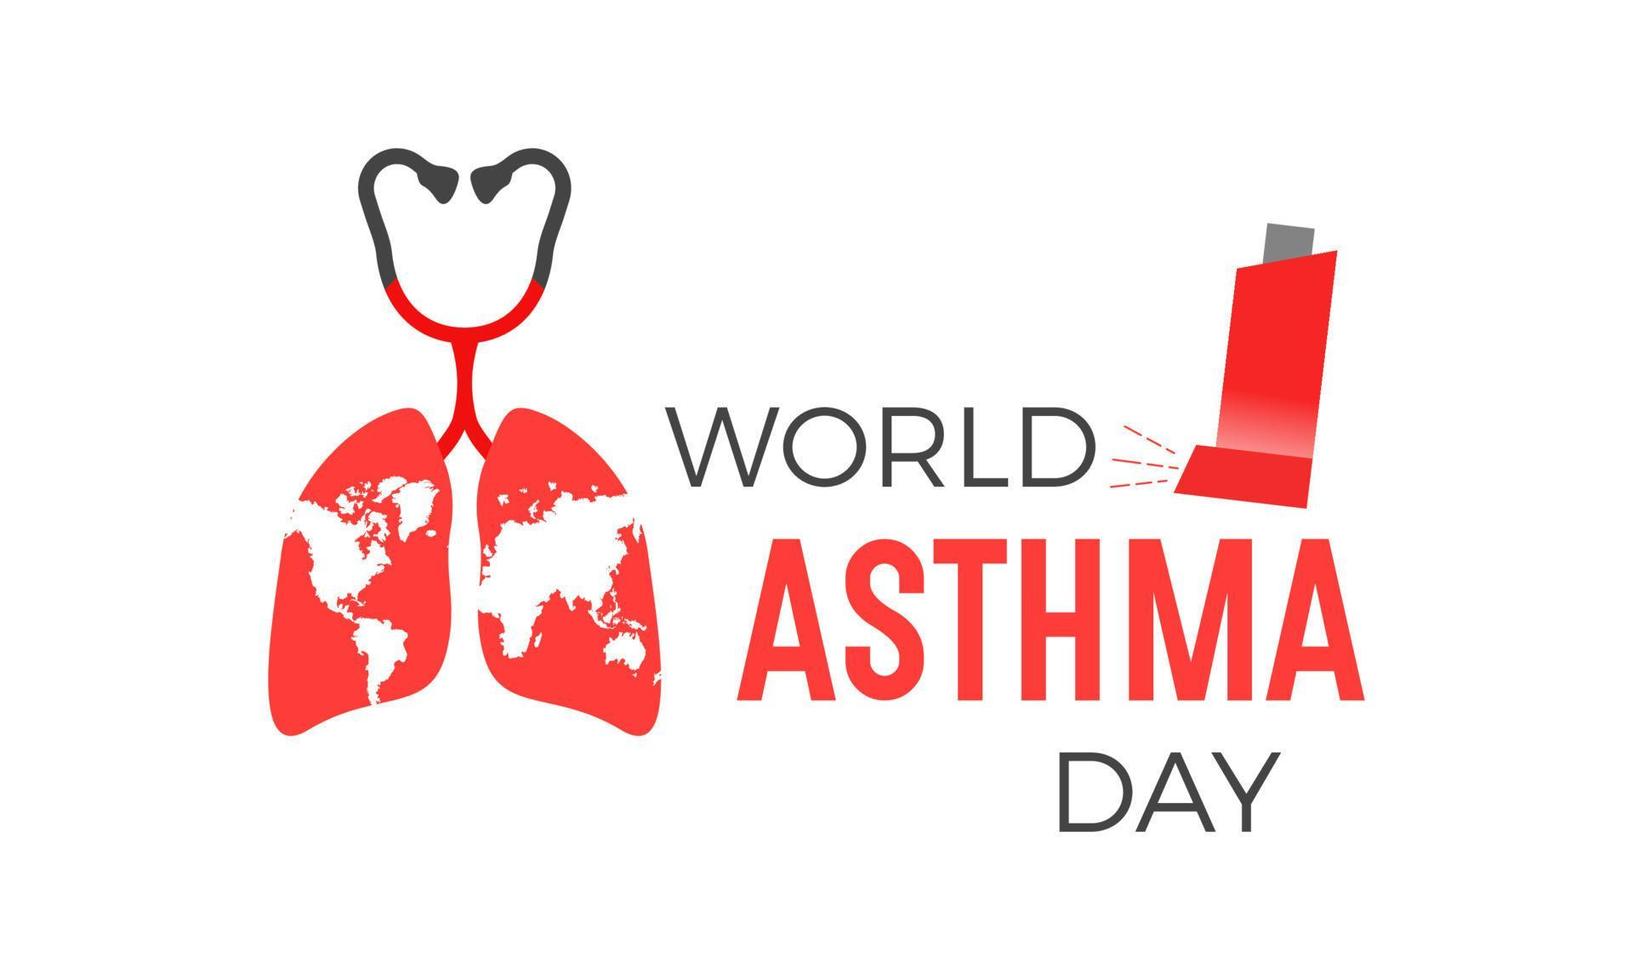 World asthma day. Vector illustration of world asthma day awareness poster with healthy lungs and inhaler.